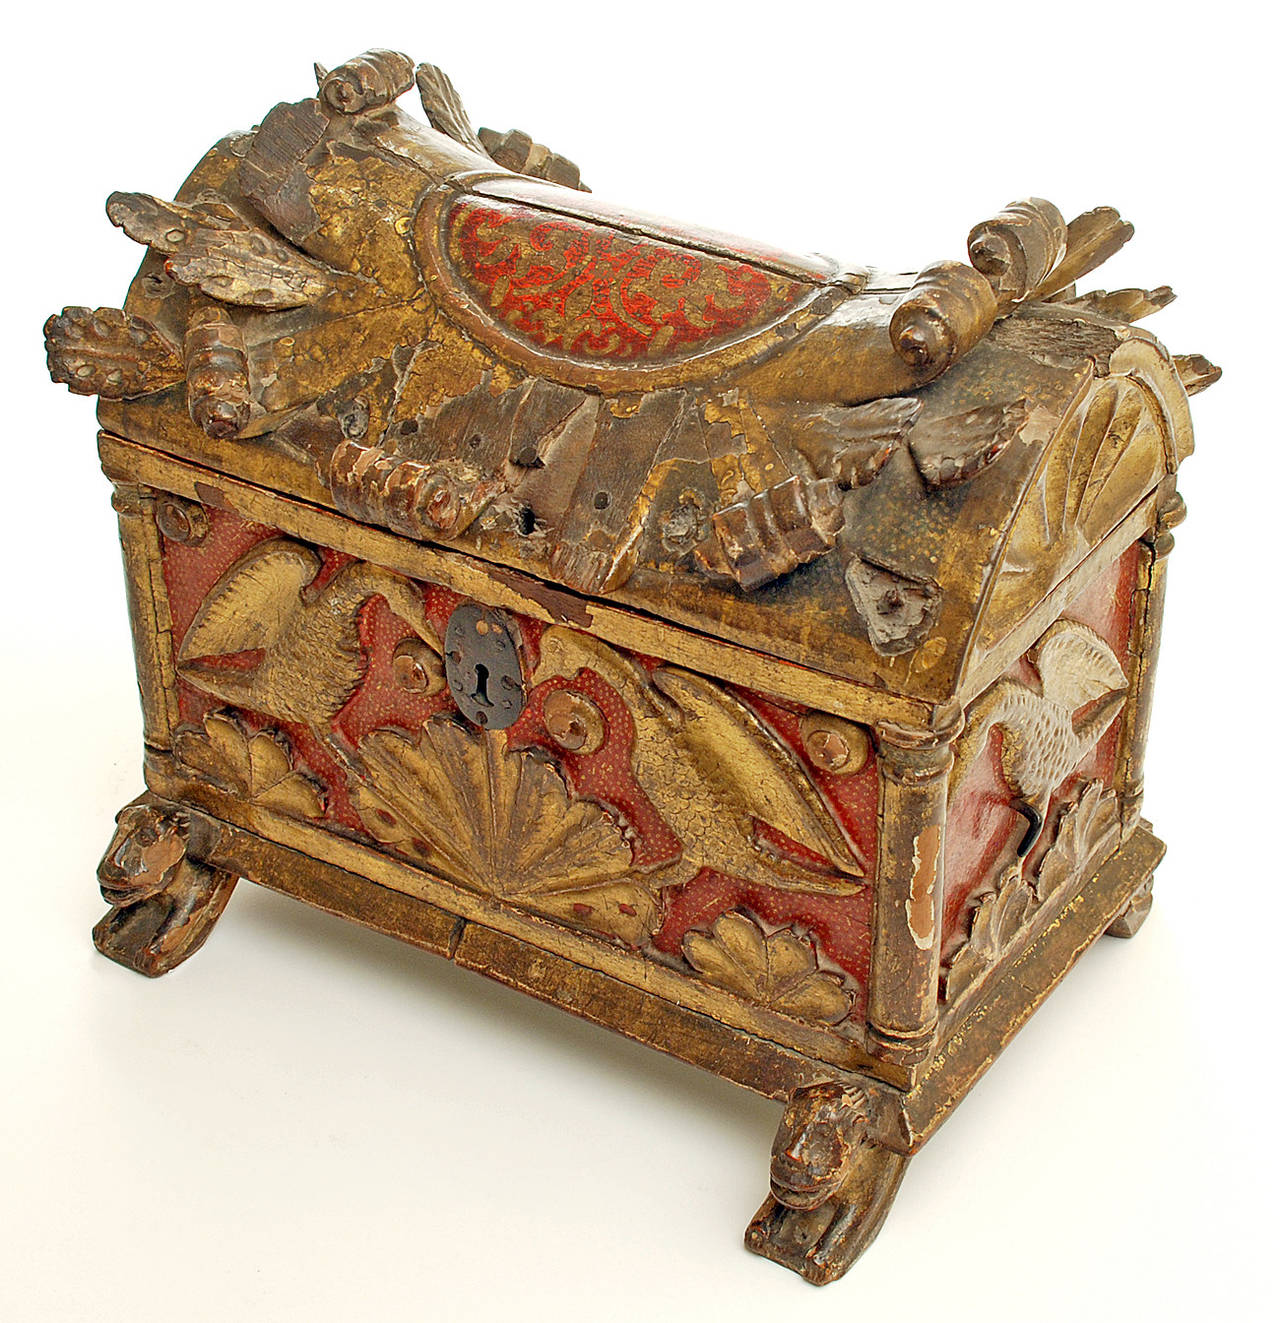 We are proud to be the custodian of this exceedingly Fine, rare and important 16th century Spanish Colonial period coffret, completely hand-carved in the Mudejar style with a saddle shaped top and acanthus scrolls. The front, side and back panels